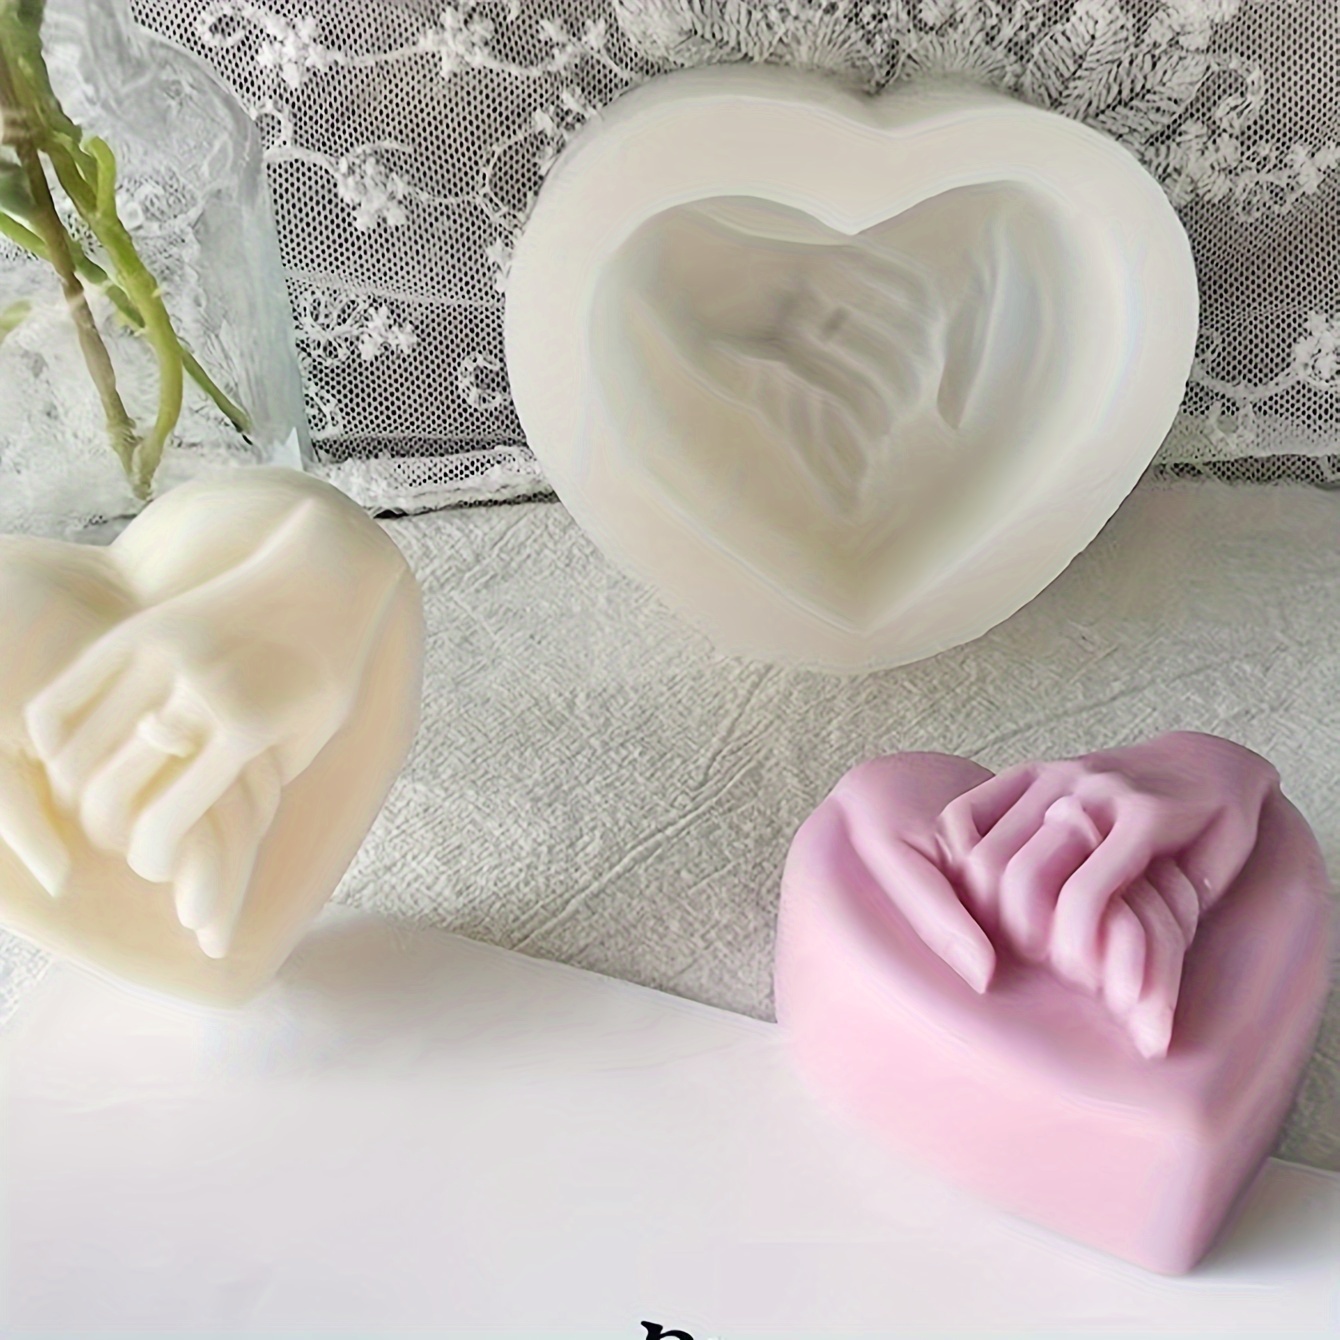 1pc Valentine's Day Double-handed Silicone Candle Mold Home Relief Heart  Soap Mold Expanding Aroma Gypsum Ornaments